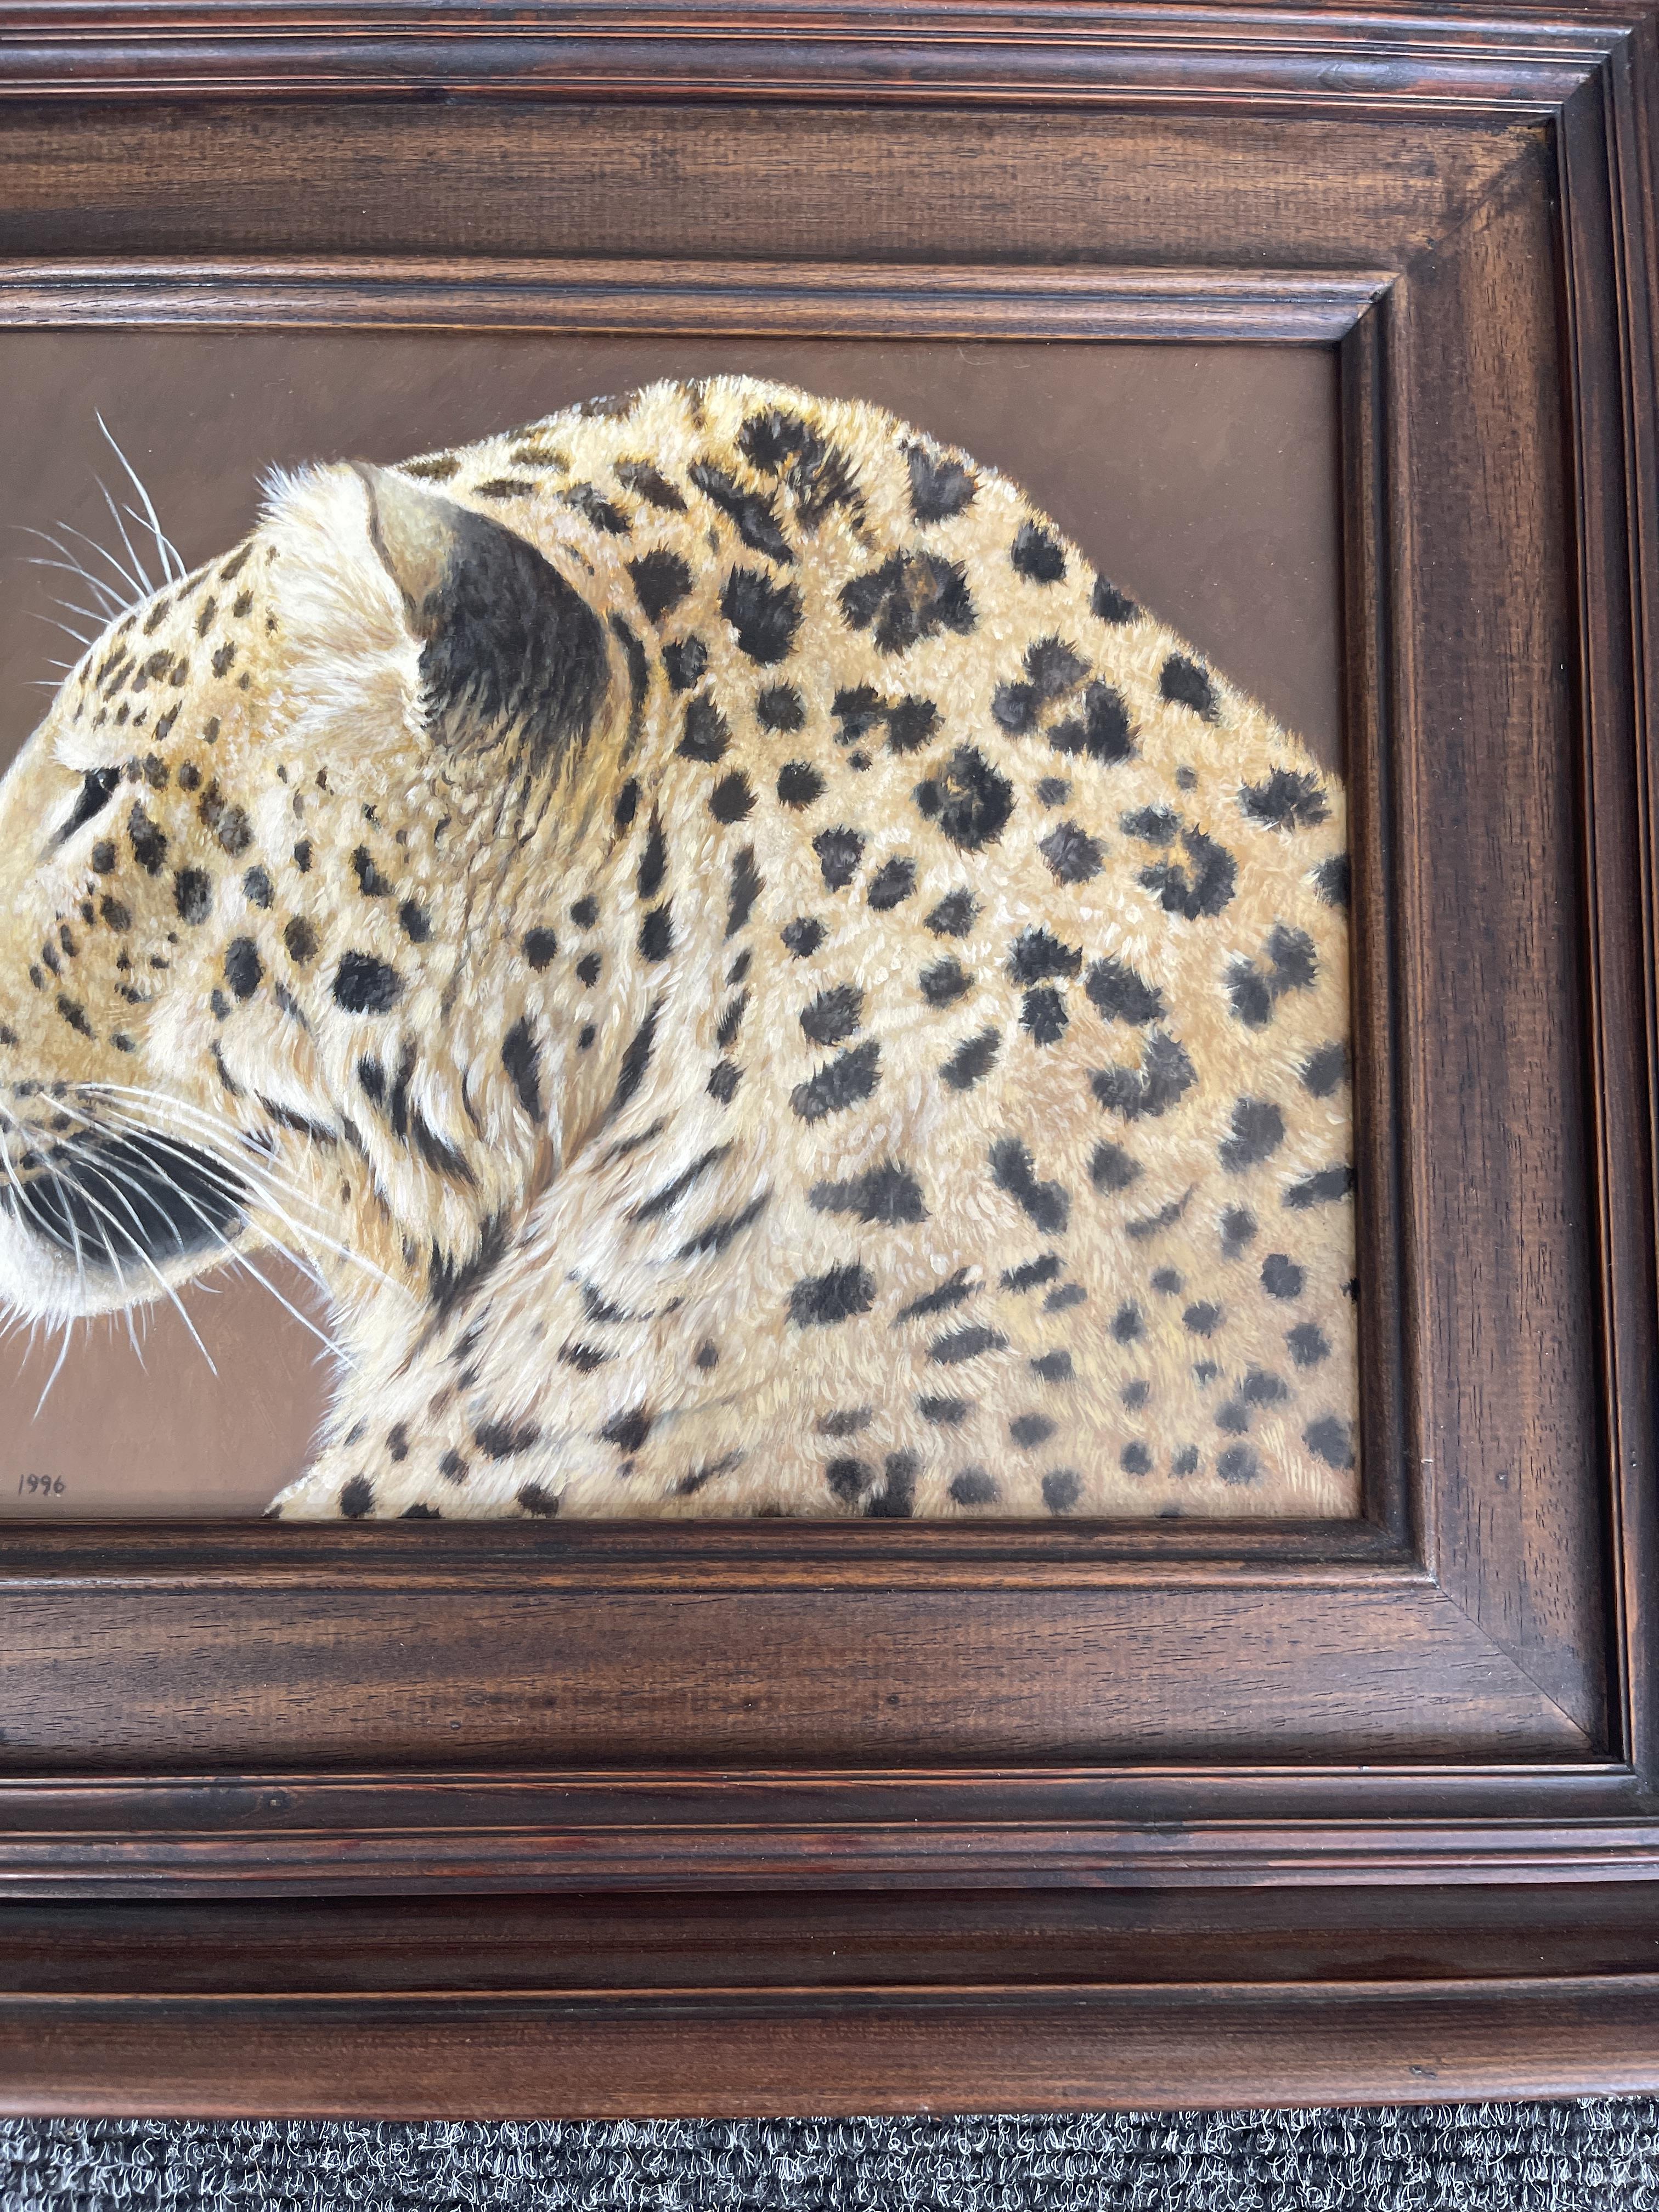 Signed and Framed Oil On Panel - Leopard - by Coli - Image 12 of 22